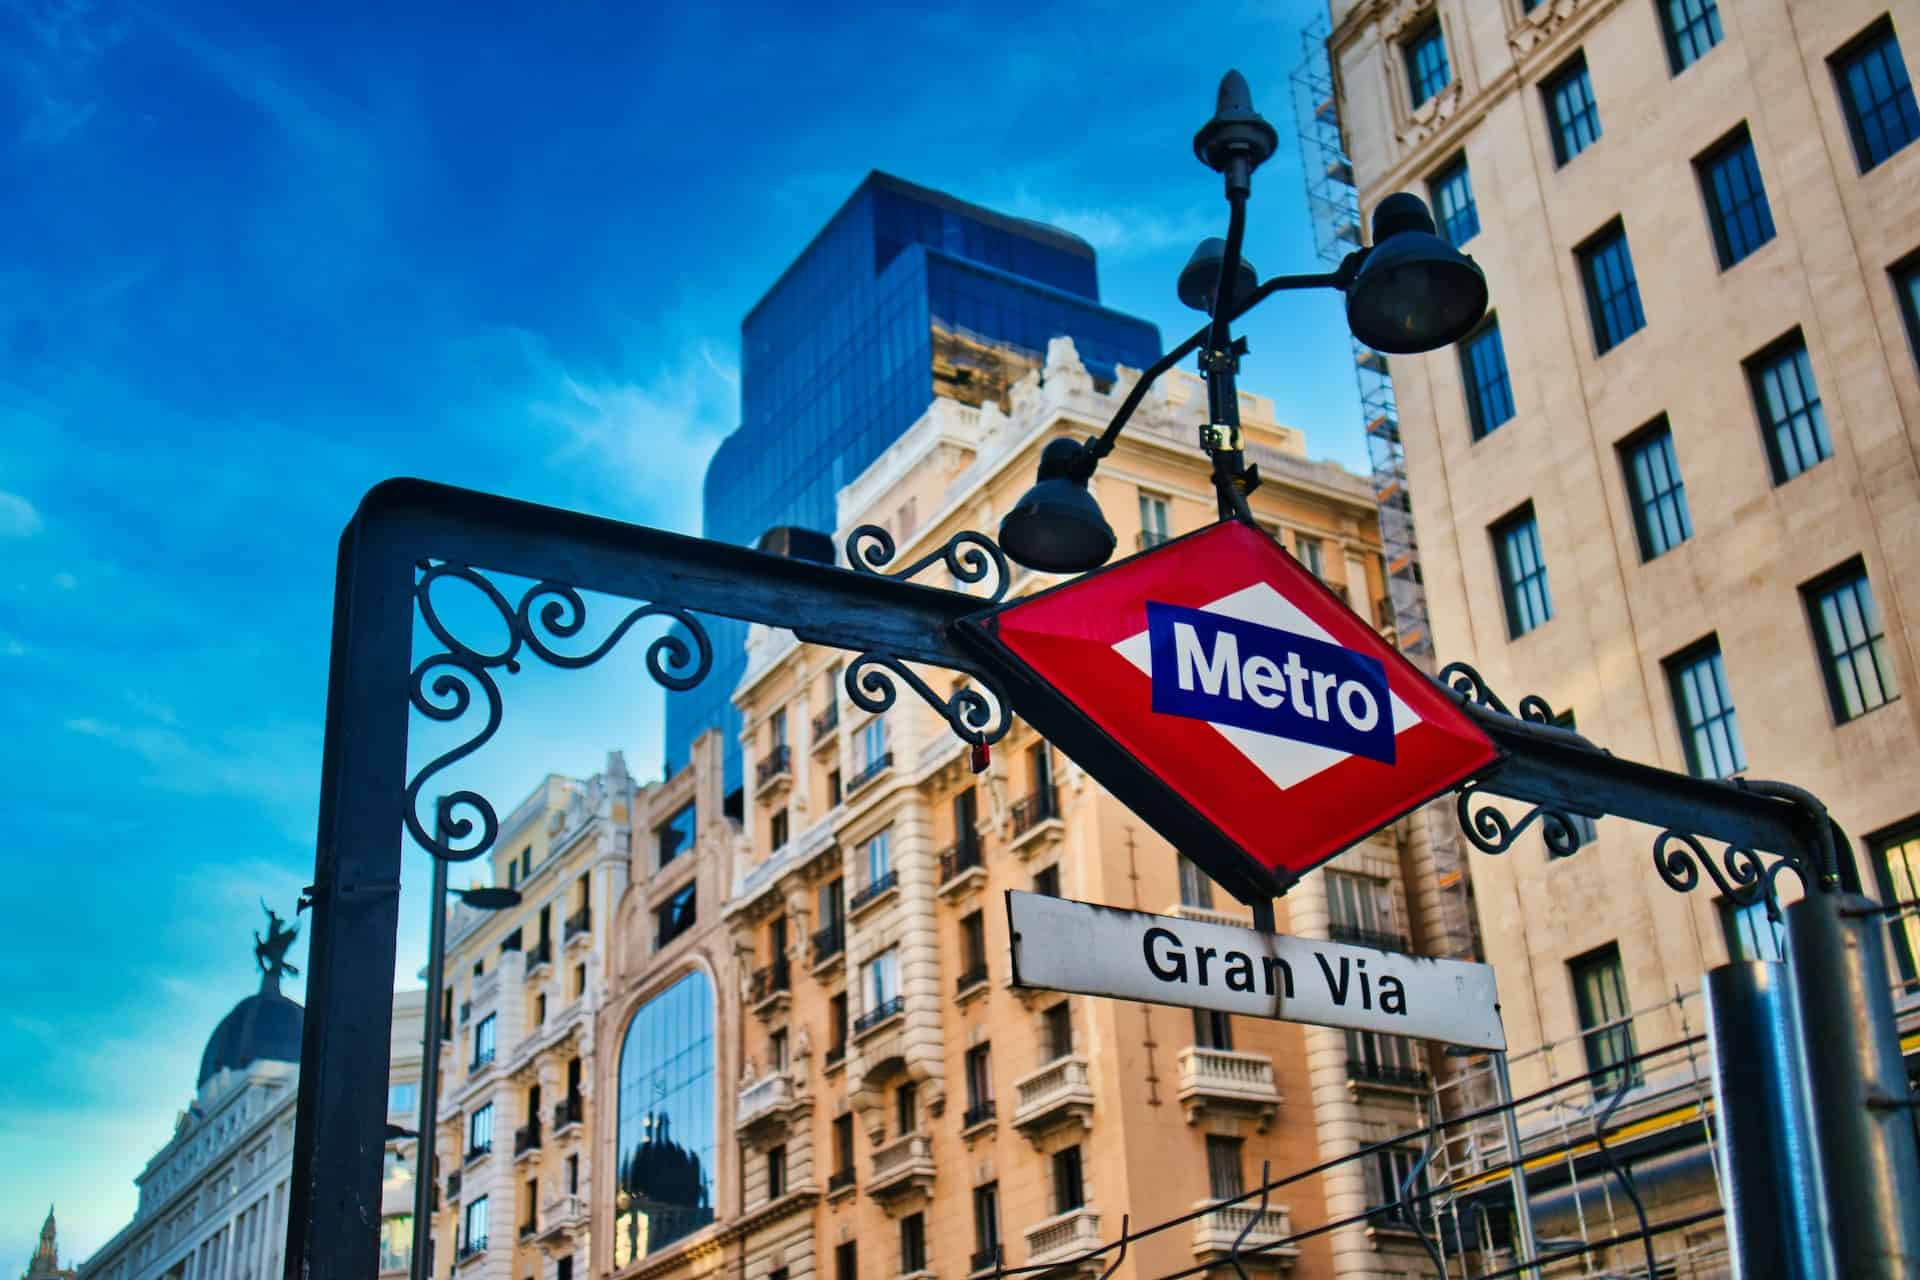 Metro sign in a city in Spain.